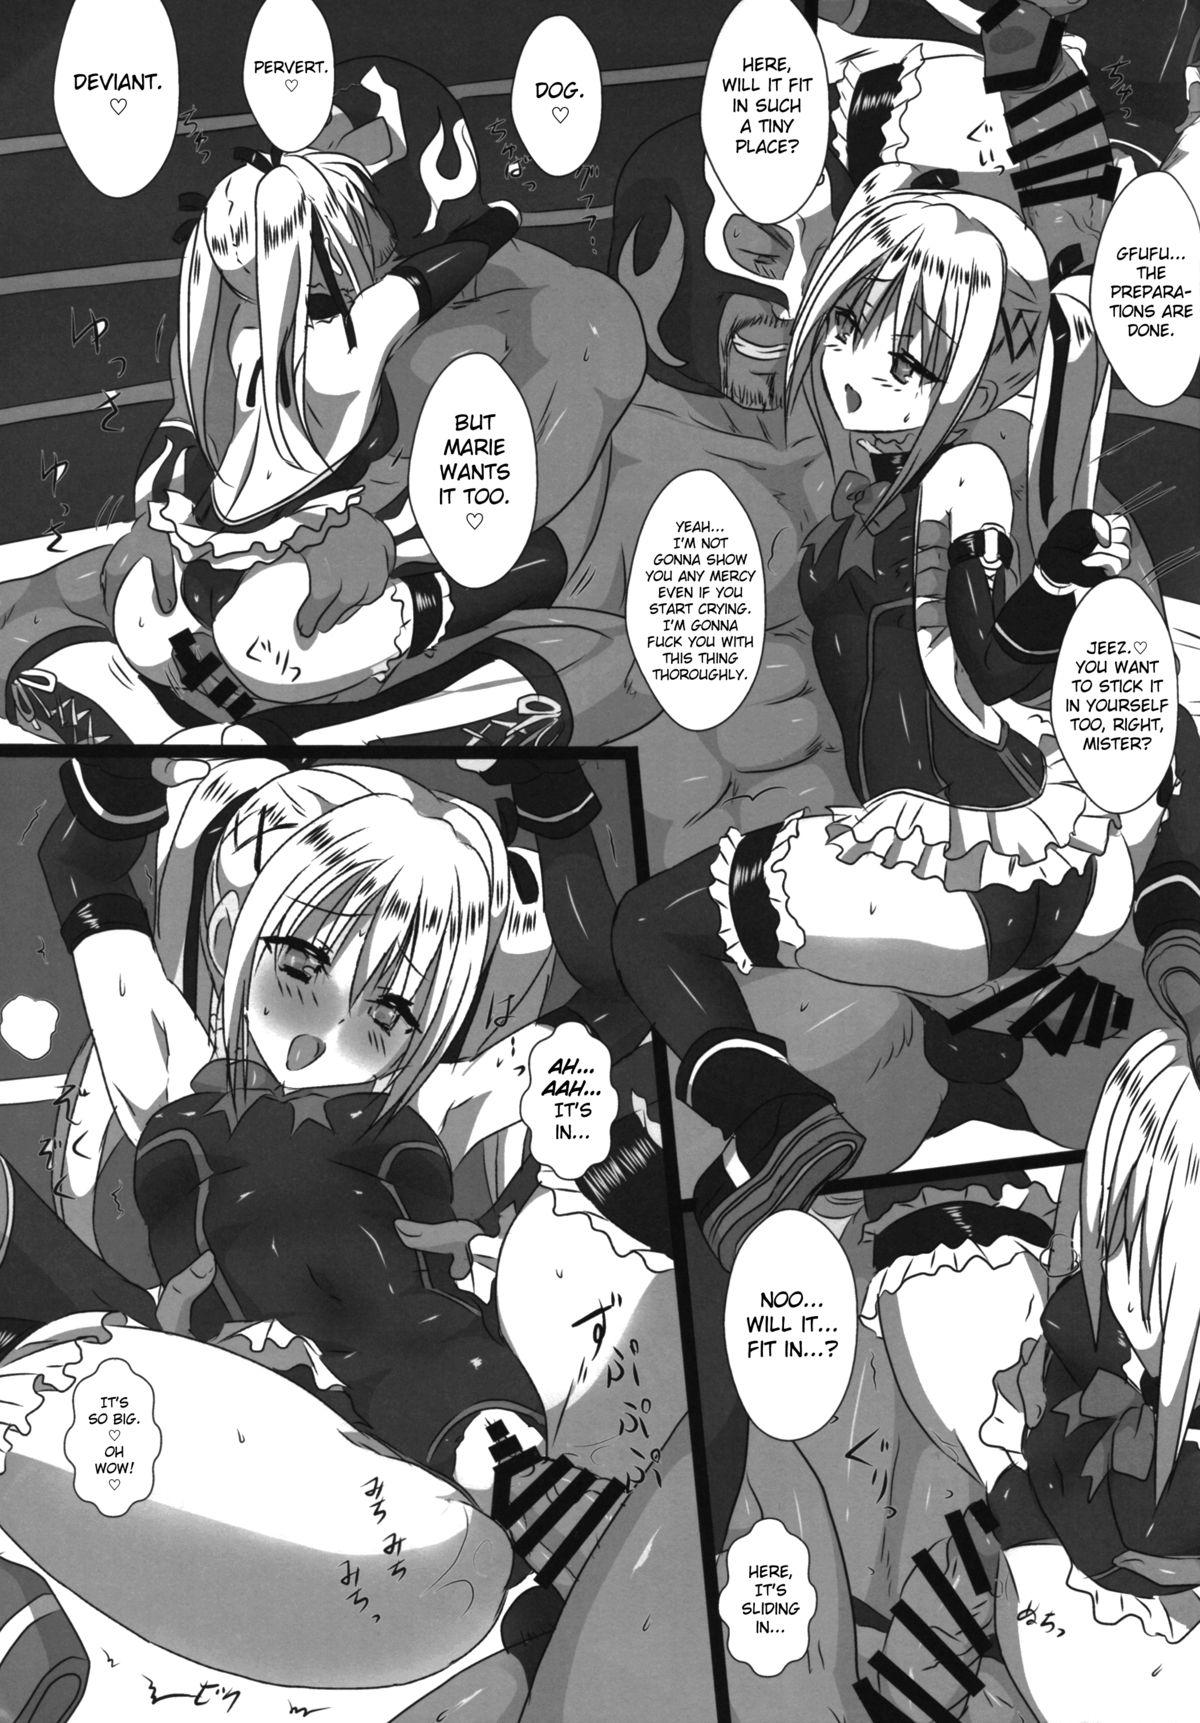 X Koko de Shitai no ne...? | This is where you want to do it, right...? - Dead or alive Webcamsex - Page 10